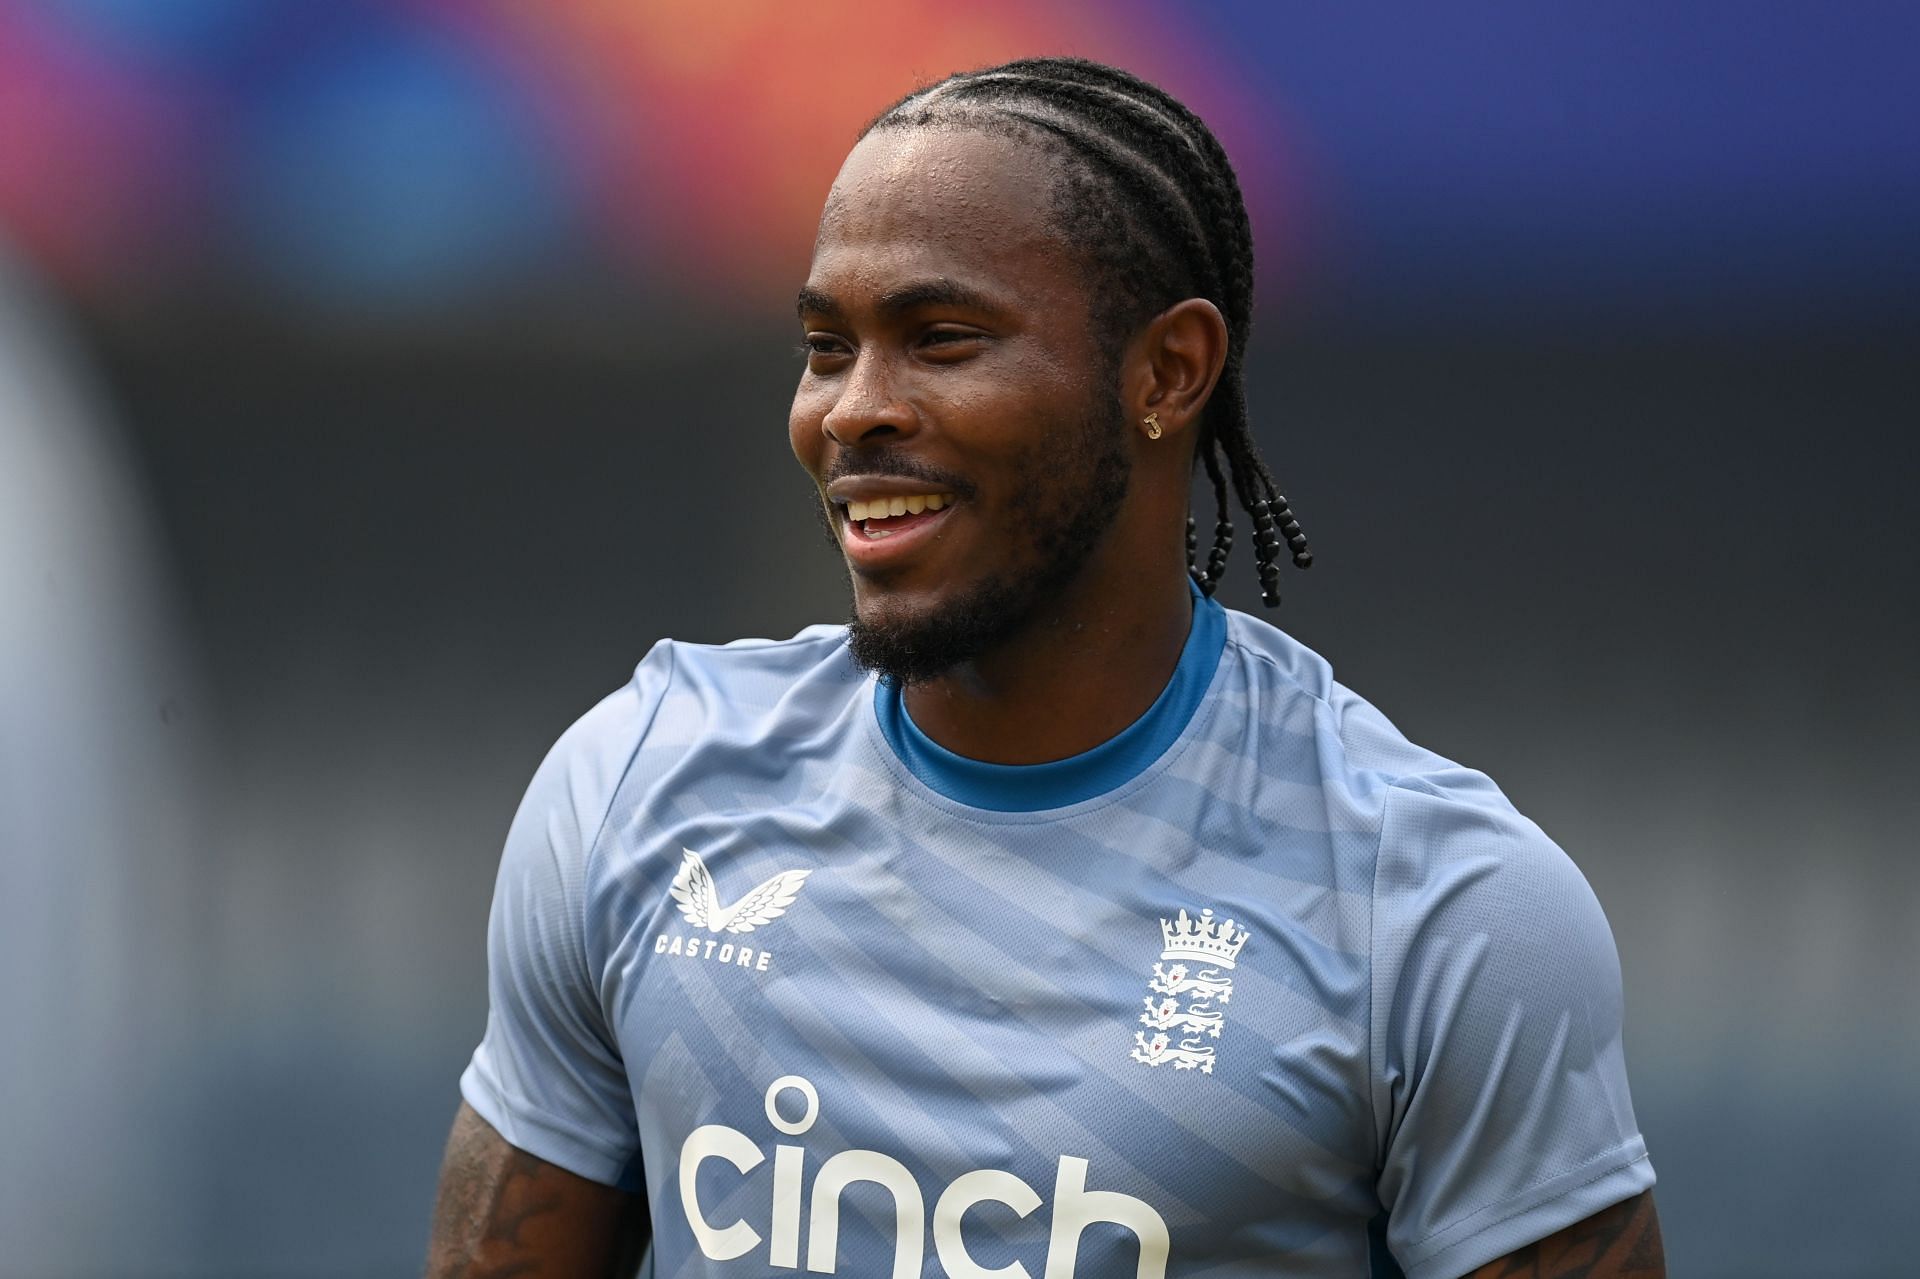 Overseas slots are best used on specialists of the caliber of Jofra Archer